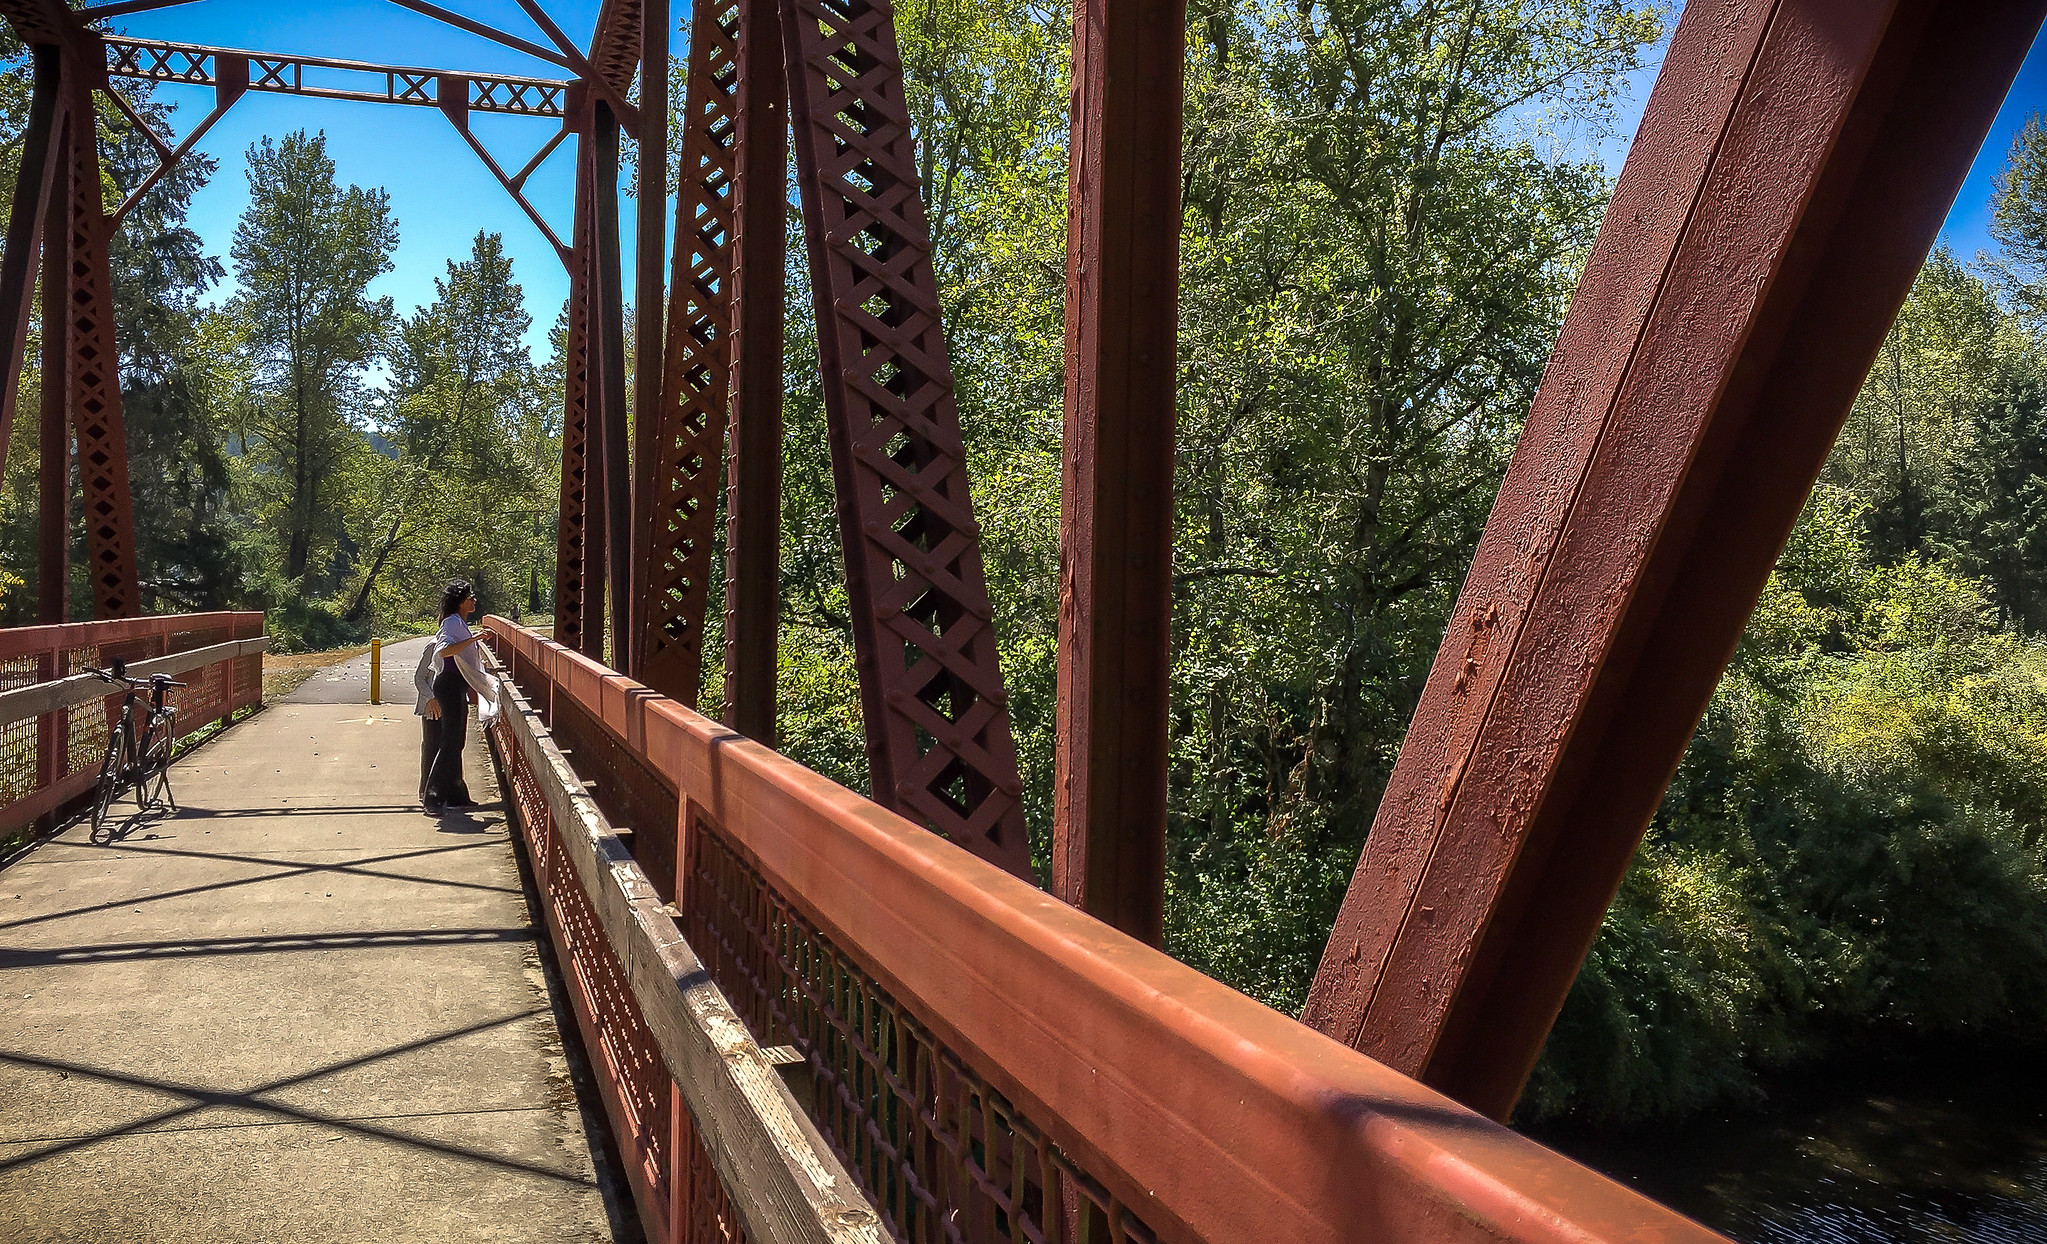 The Row River Trail to Covered Bridges in Oregon